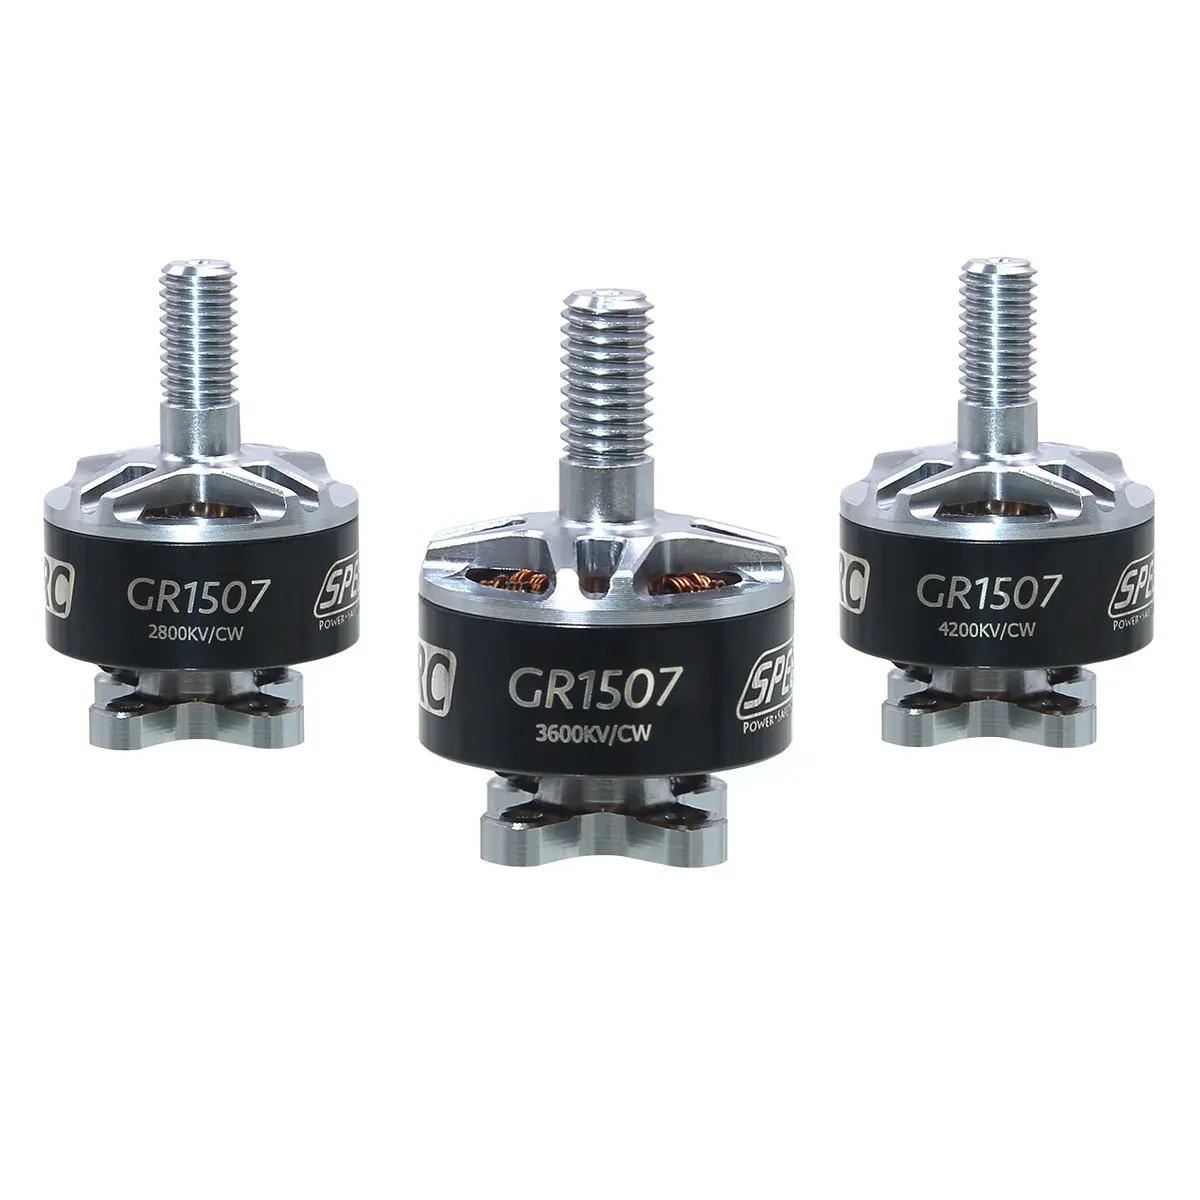 

GEPRC GEP-GR1507 Motor 2800/3200/3600/4200KV Suitable For DIY RC FPV Quadcopter Freestyle Racing Series Drone Accessories Parts